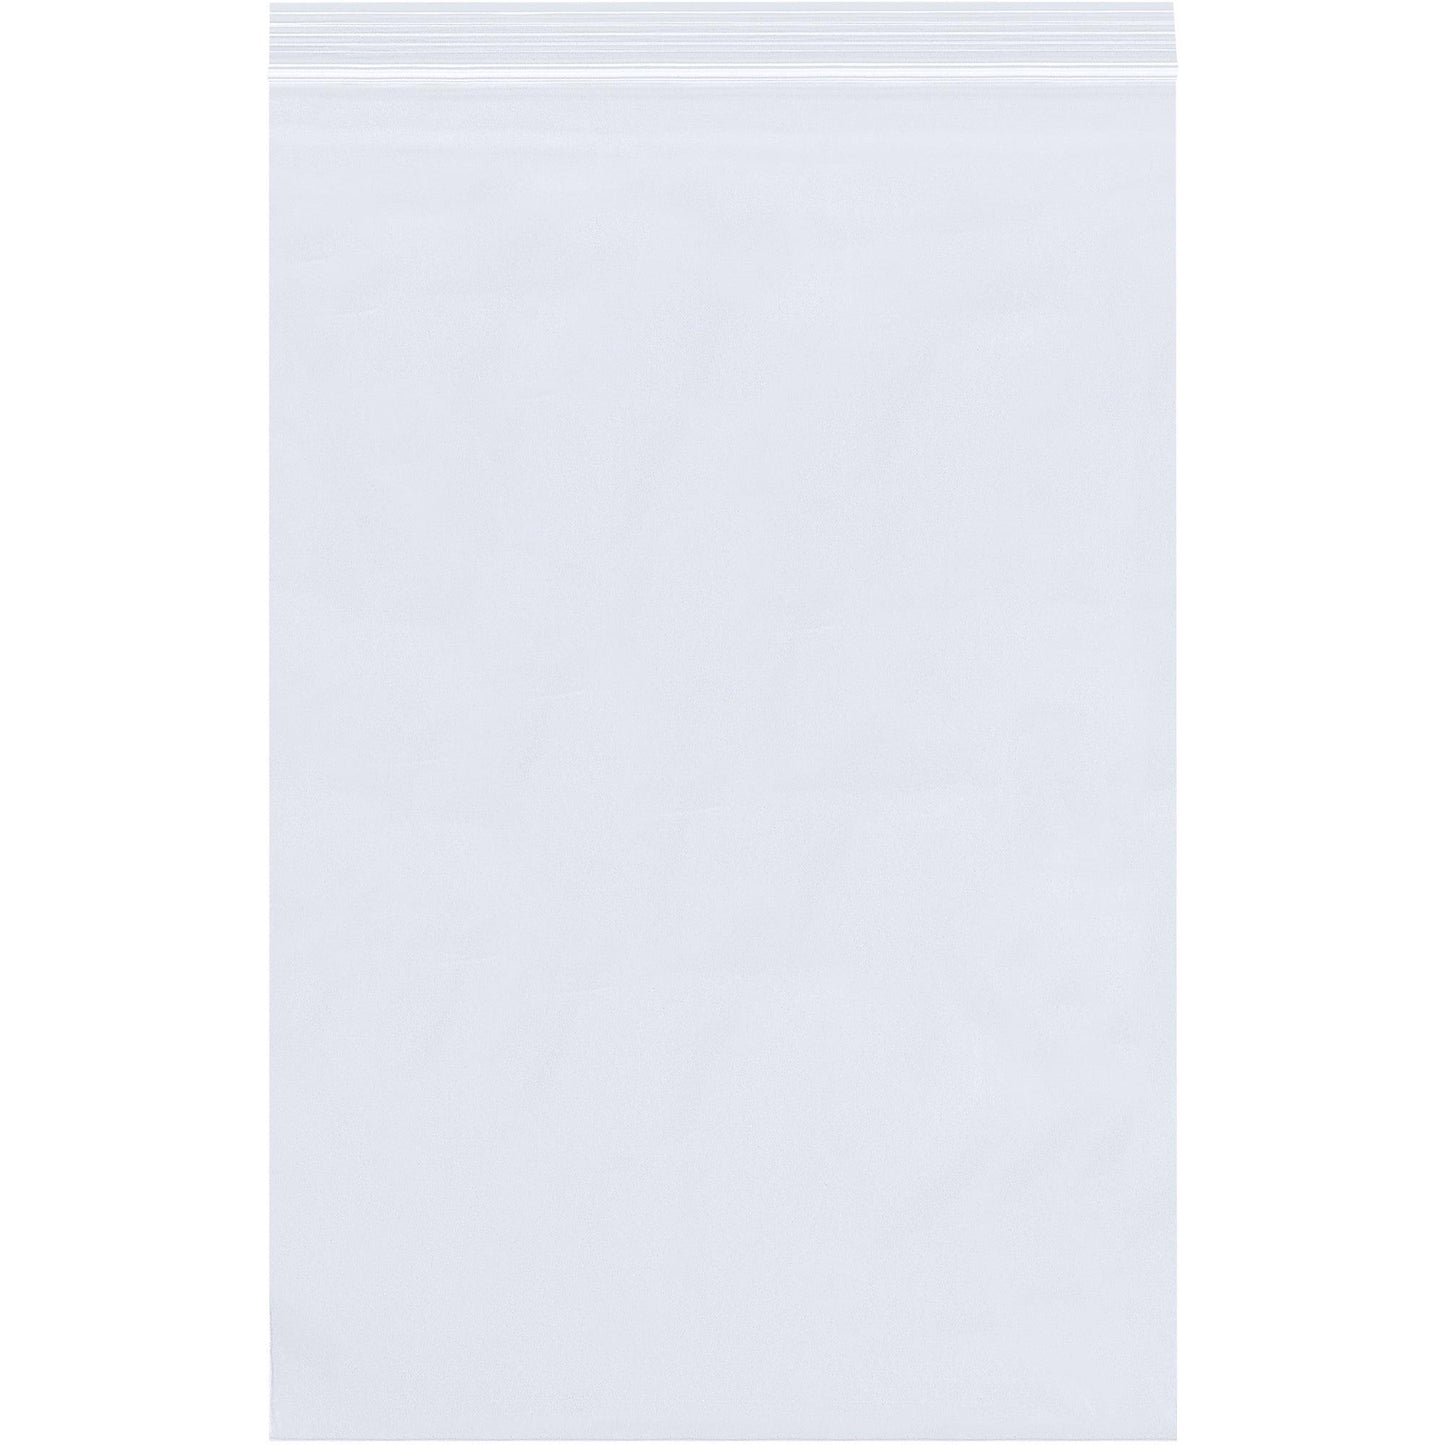 8 x 10" - 6 Mil Reclosable Poly Bags - PB3879